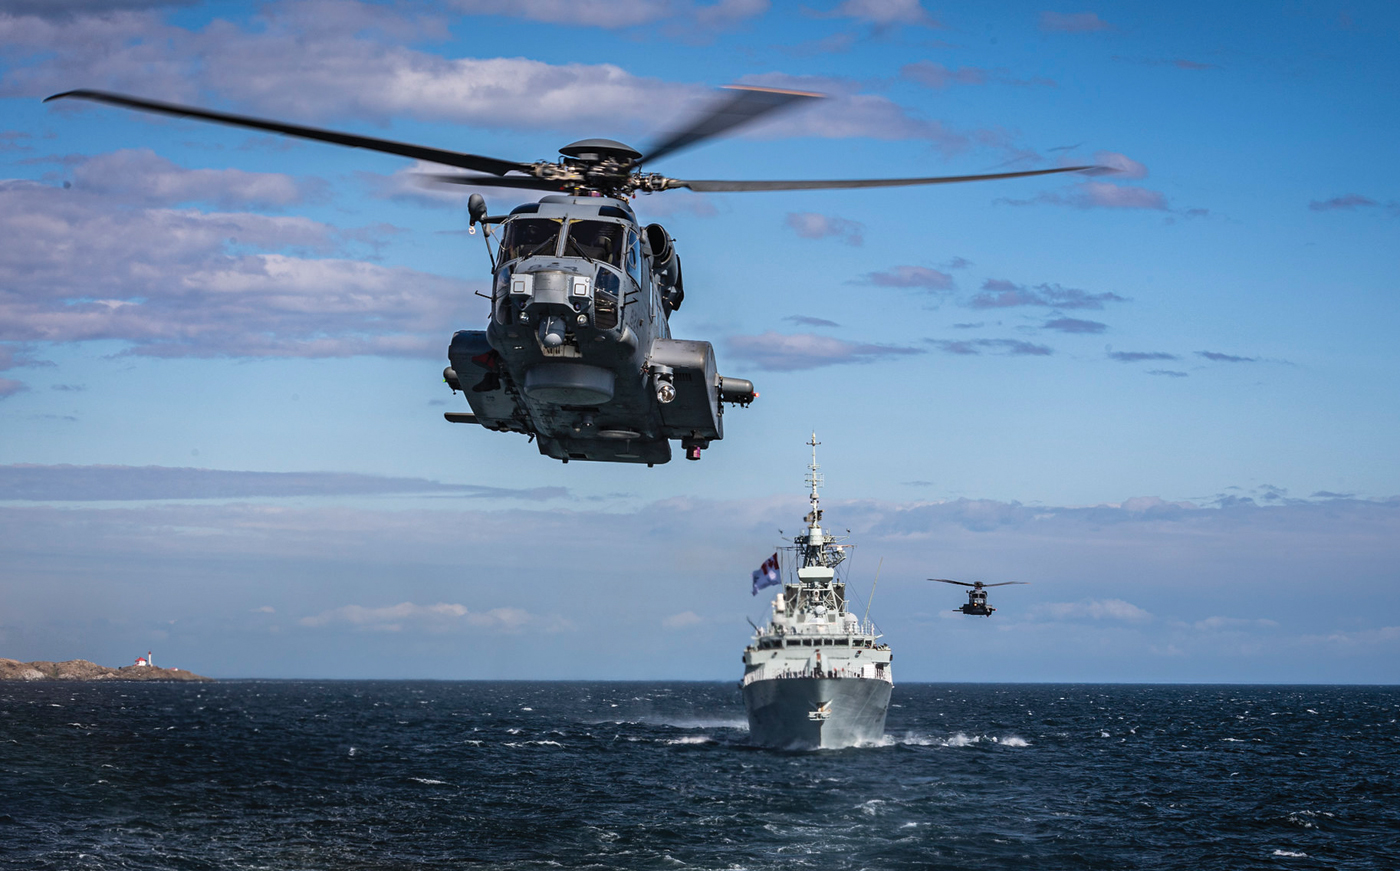 The CH-148 Cyclone helicopters (seen here accompanying HMCS Winnipeg and HMCS Regina) are the RCNs main ship-borne maritime helicopter. Photo by MS Dan Bard, Canadian Forces Combat Camera